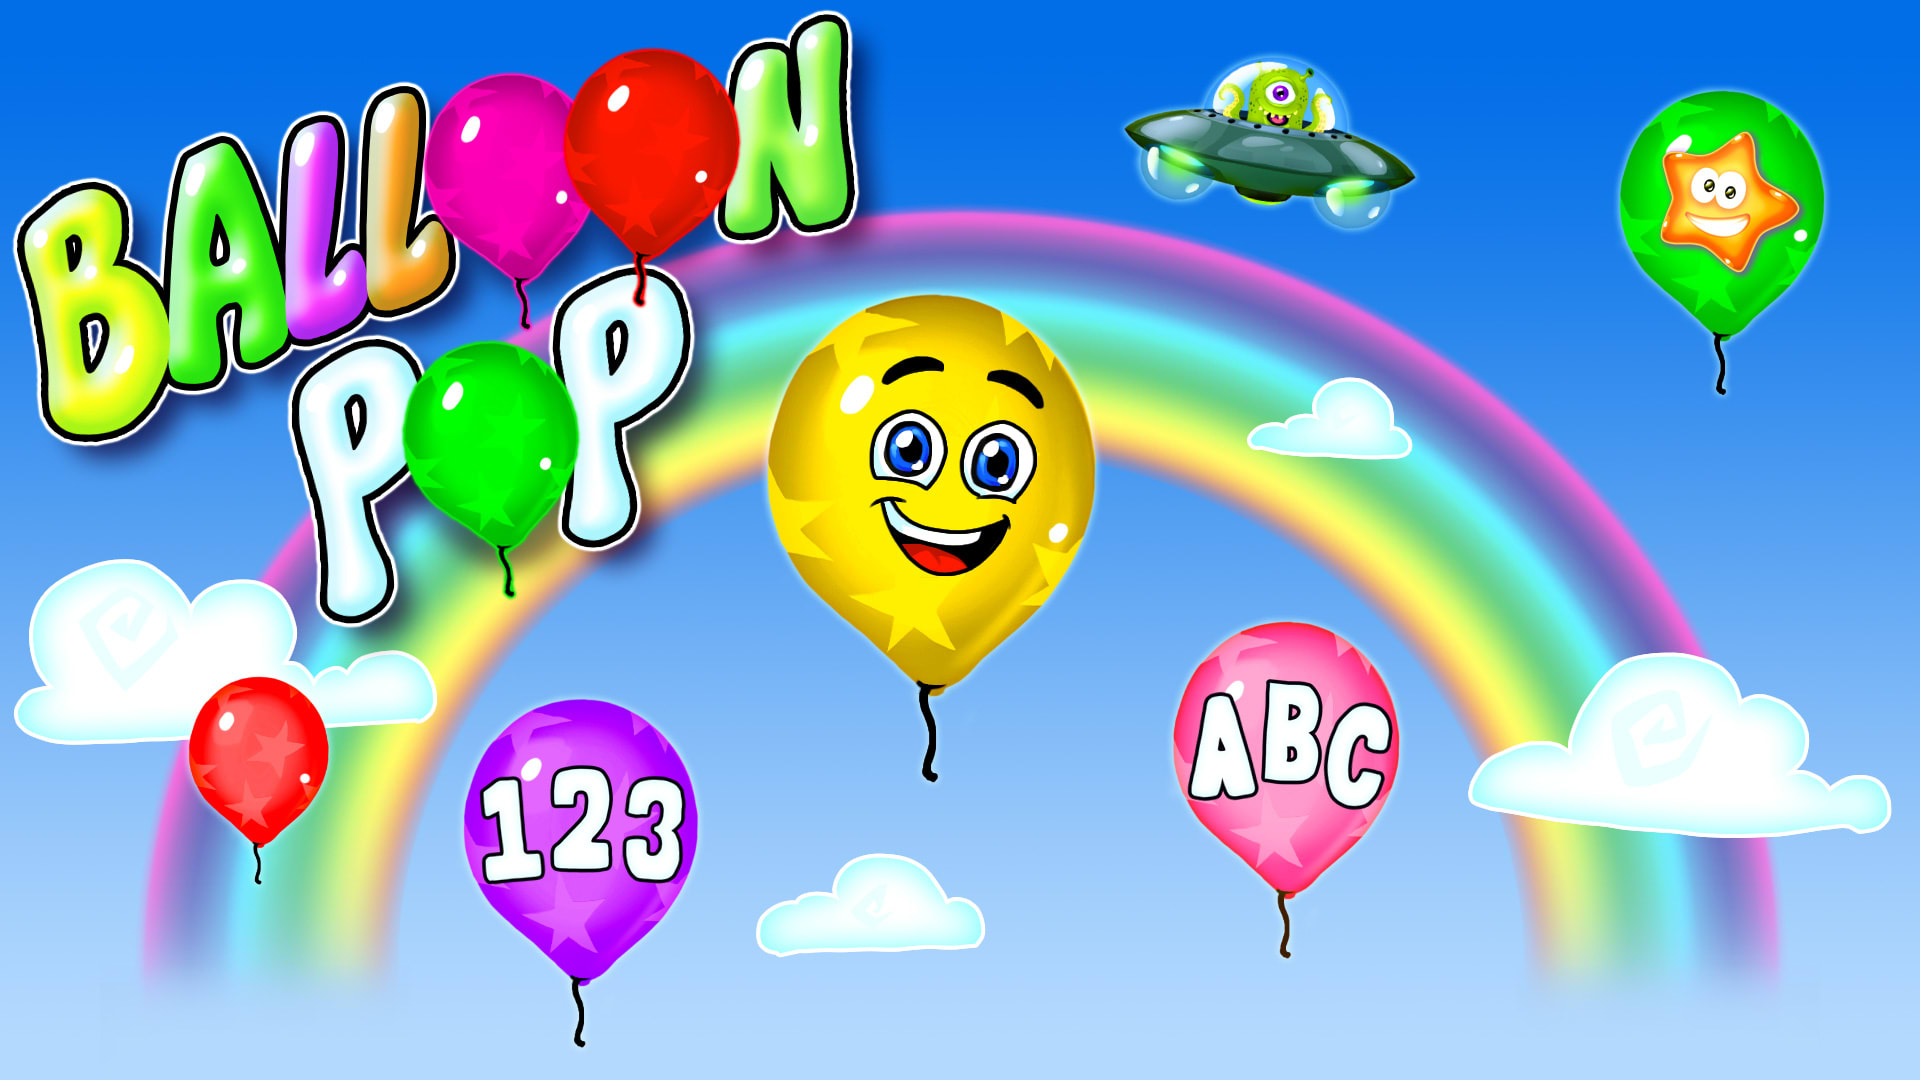 Balloon Pop - Learning Letters, Numbers, Colors, Game for Kids